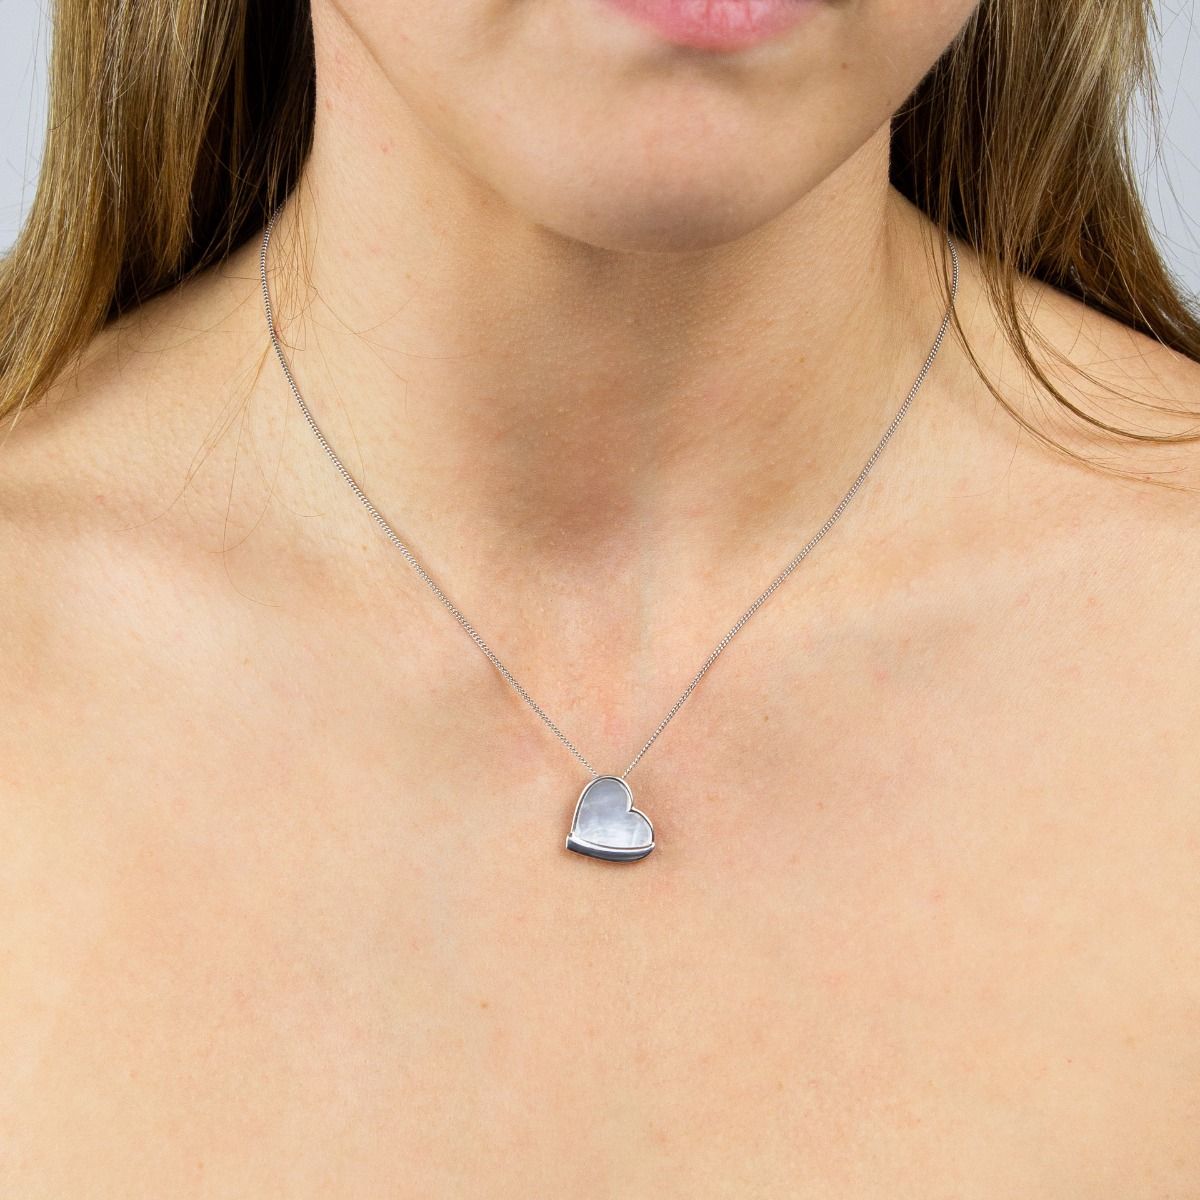 Heart Pendant with Mother of Pearl Centre